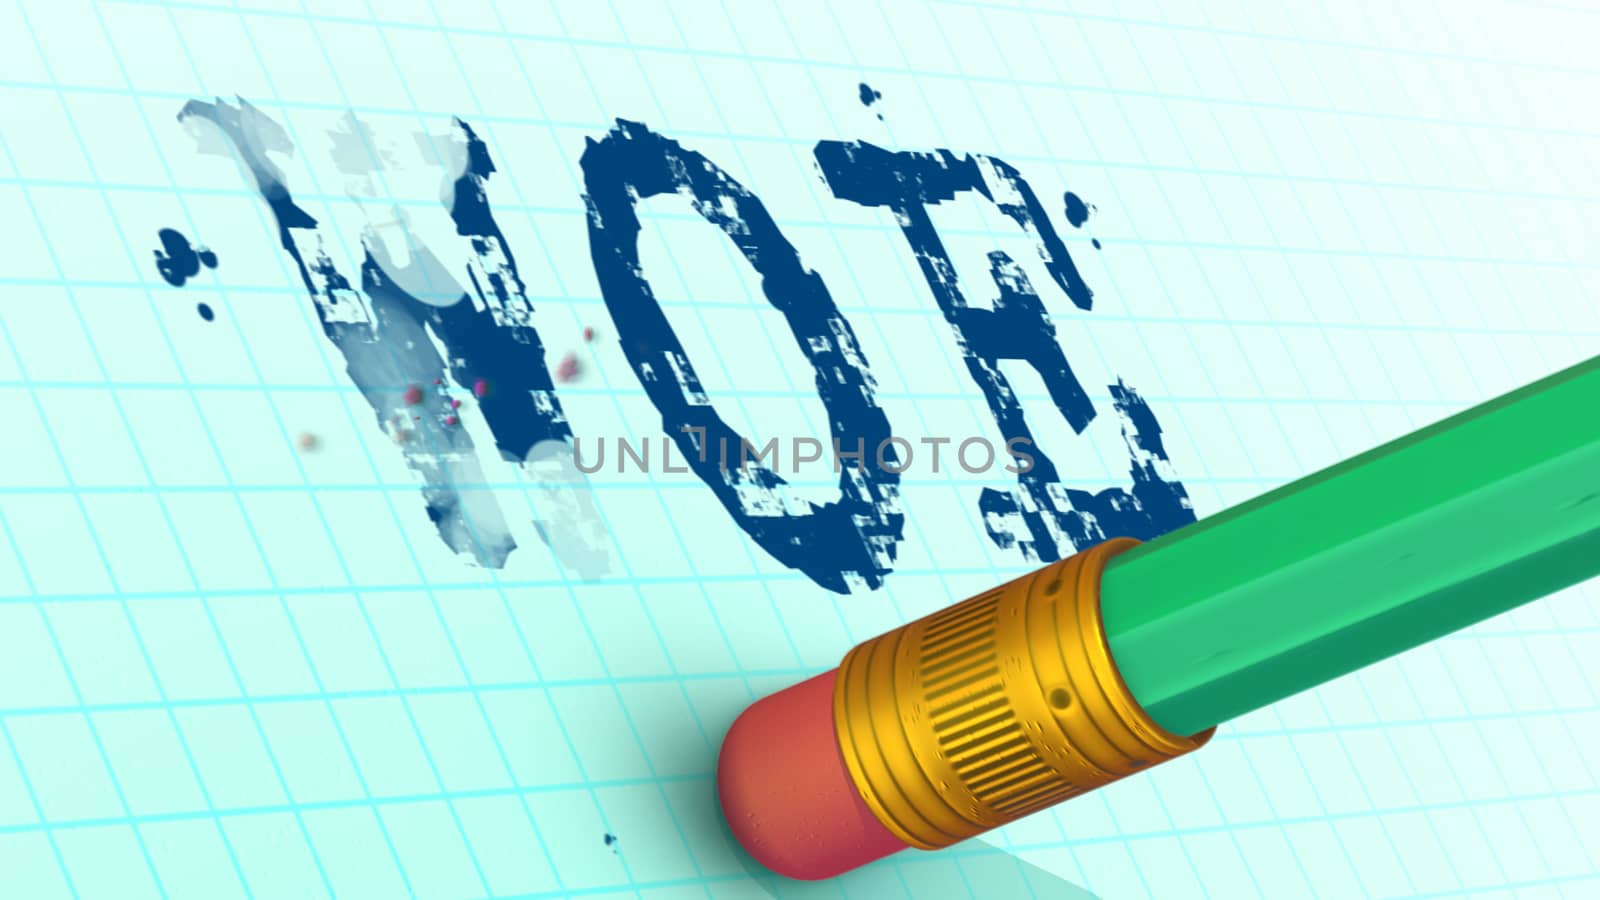 Hopeful 3d illustration of a modern green pencil with a ferrule and eraser removing woe word from a white sheet with a grid. It looks optimistic and inspiring